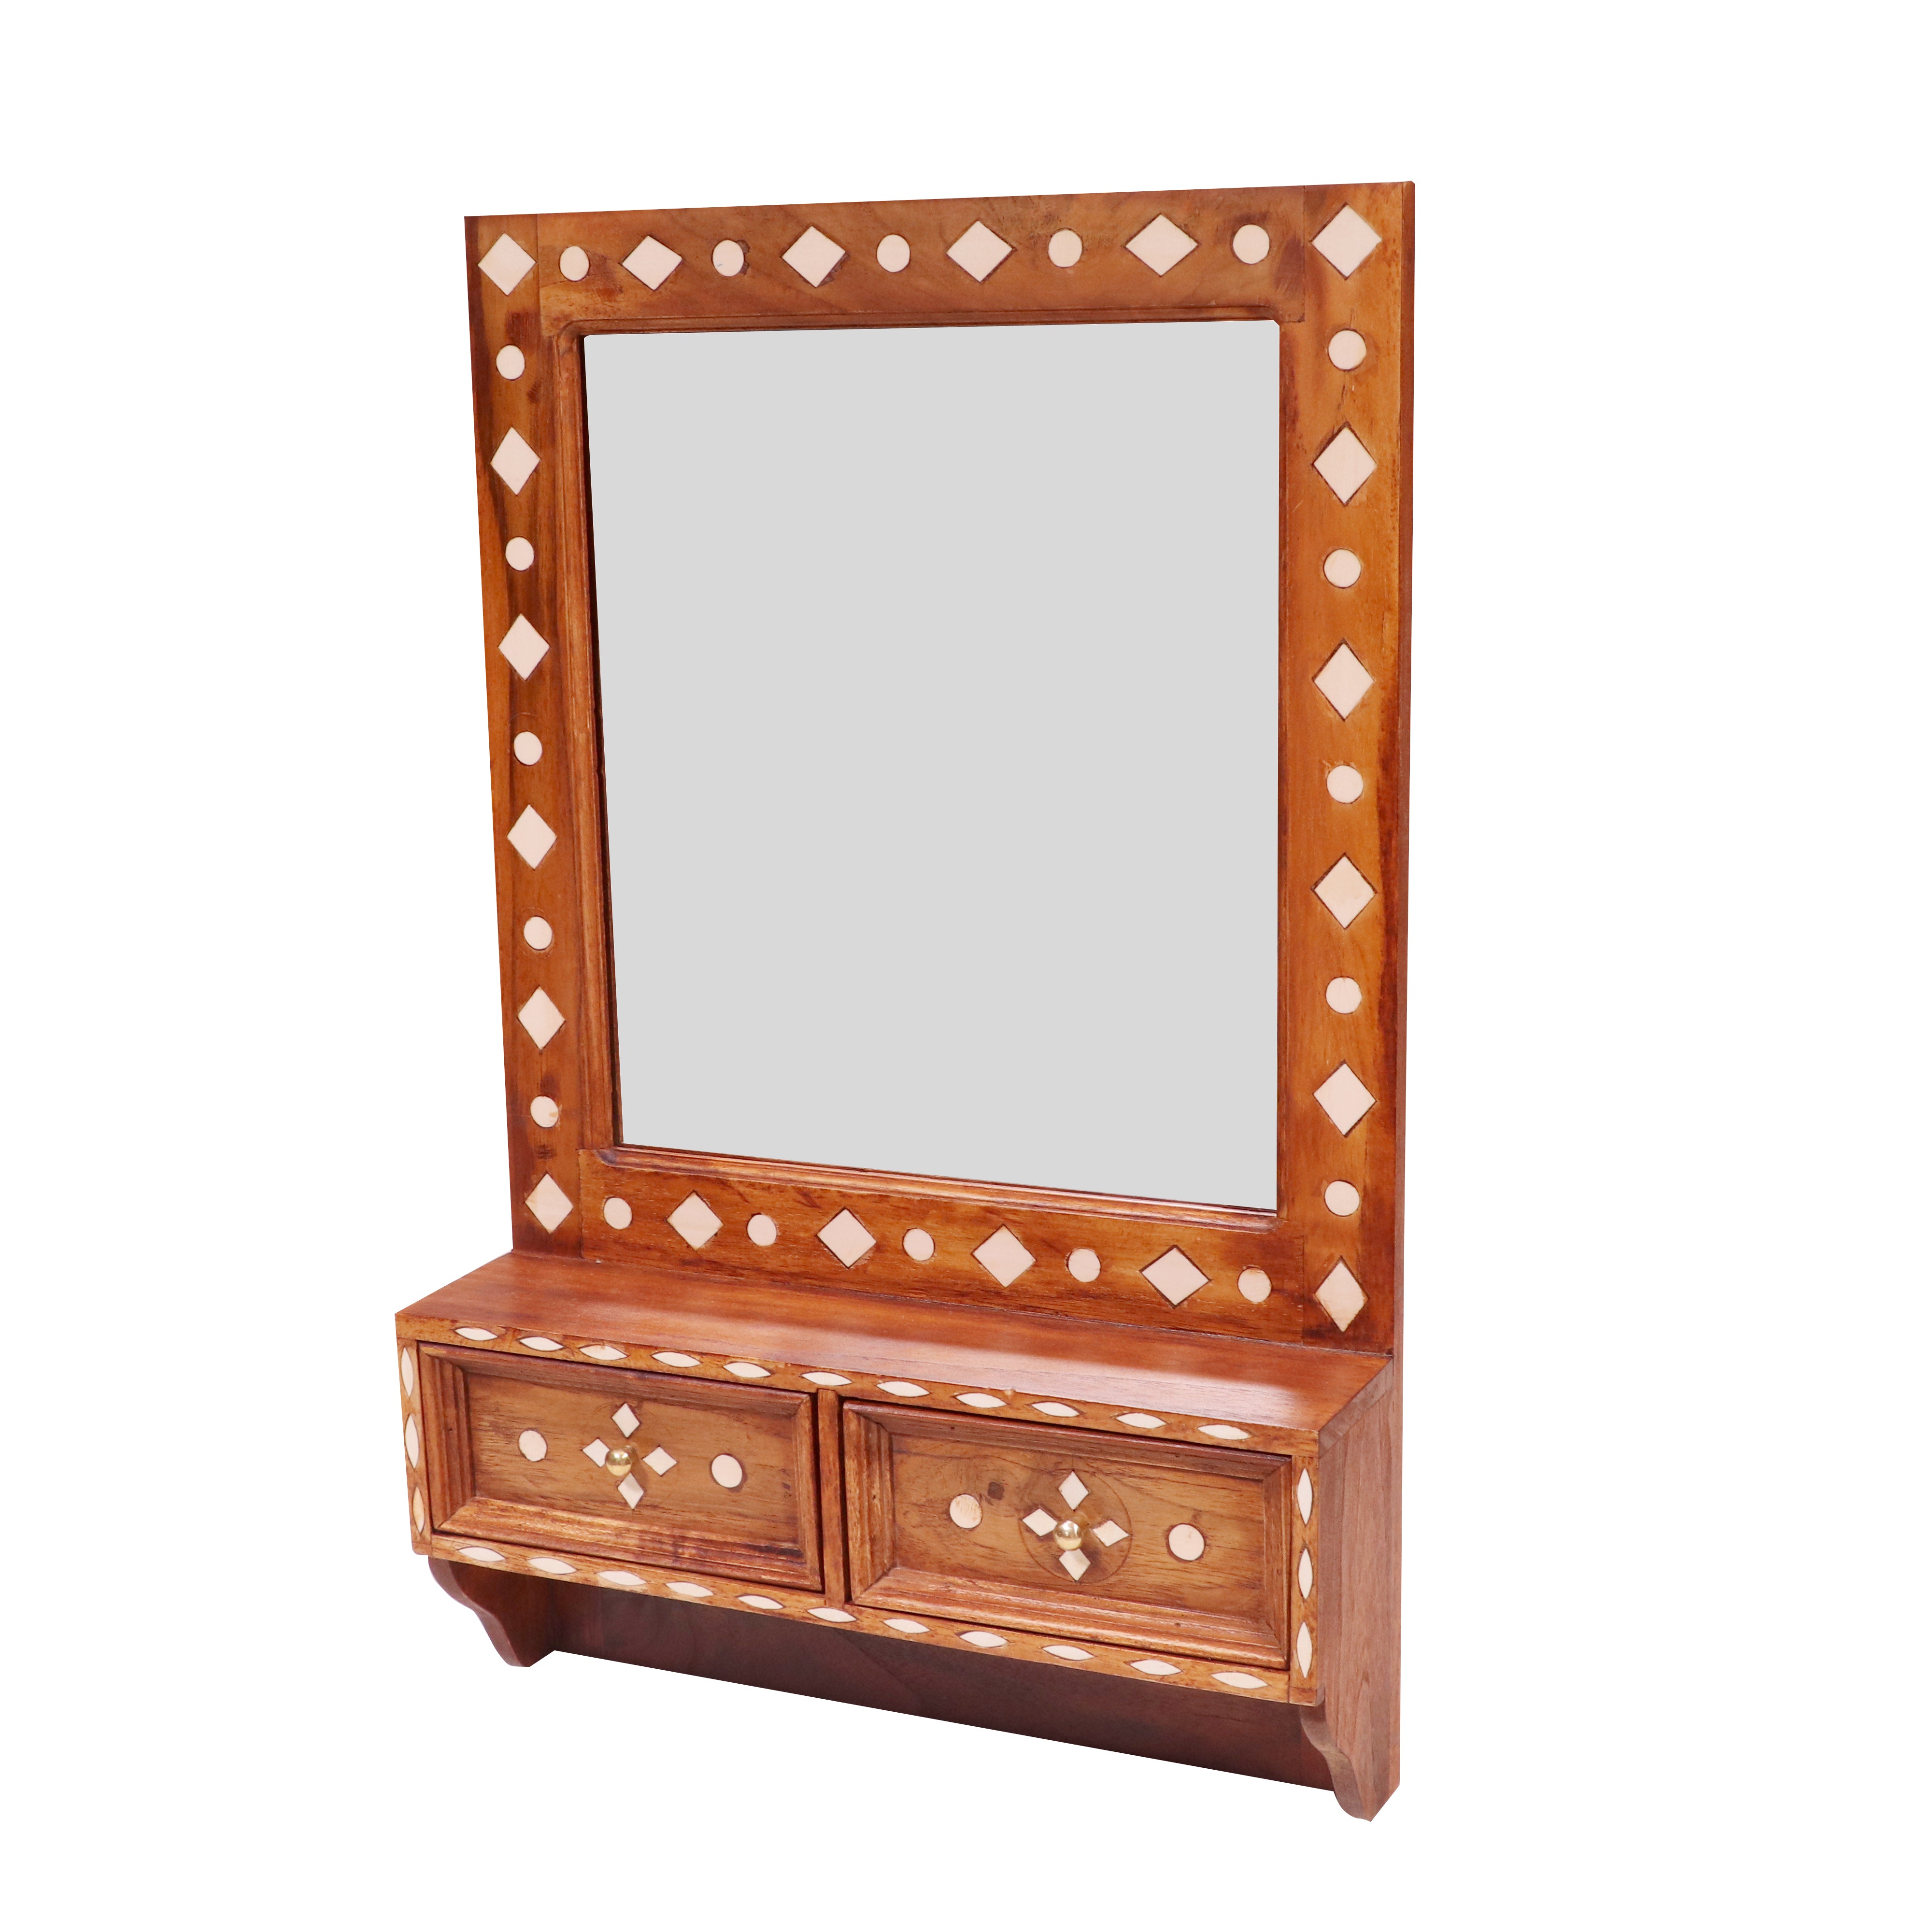 Denver Double Drawer Inlay Designed Wooden Handmade Mirror for Home Mirror